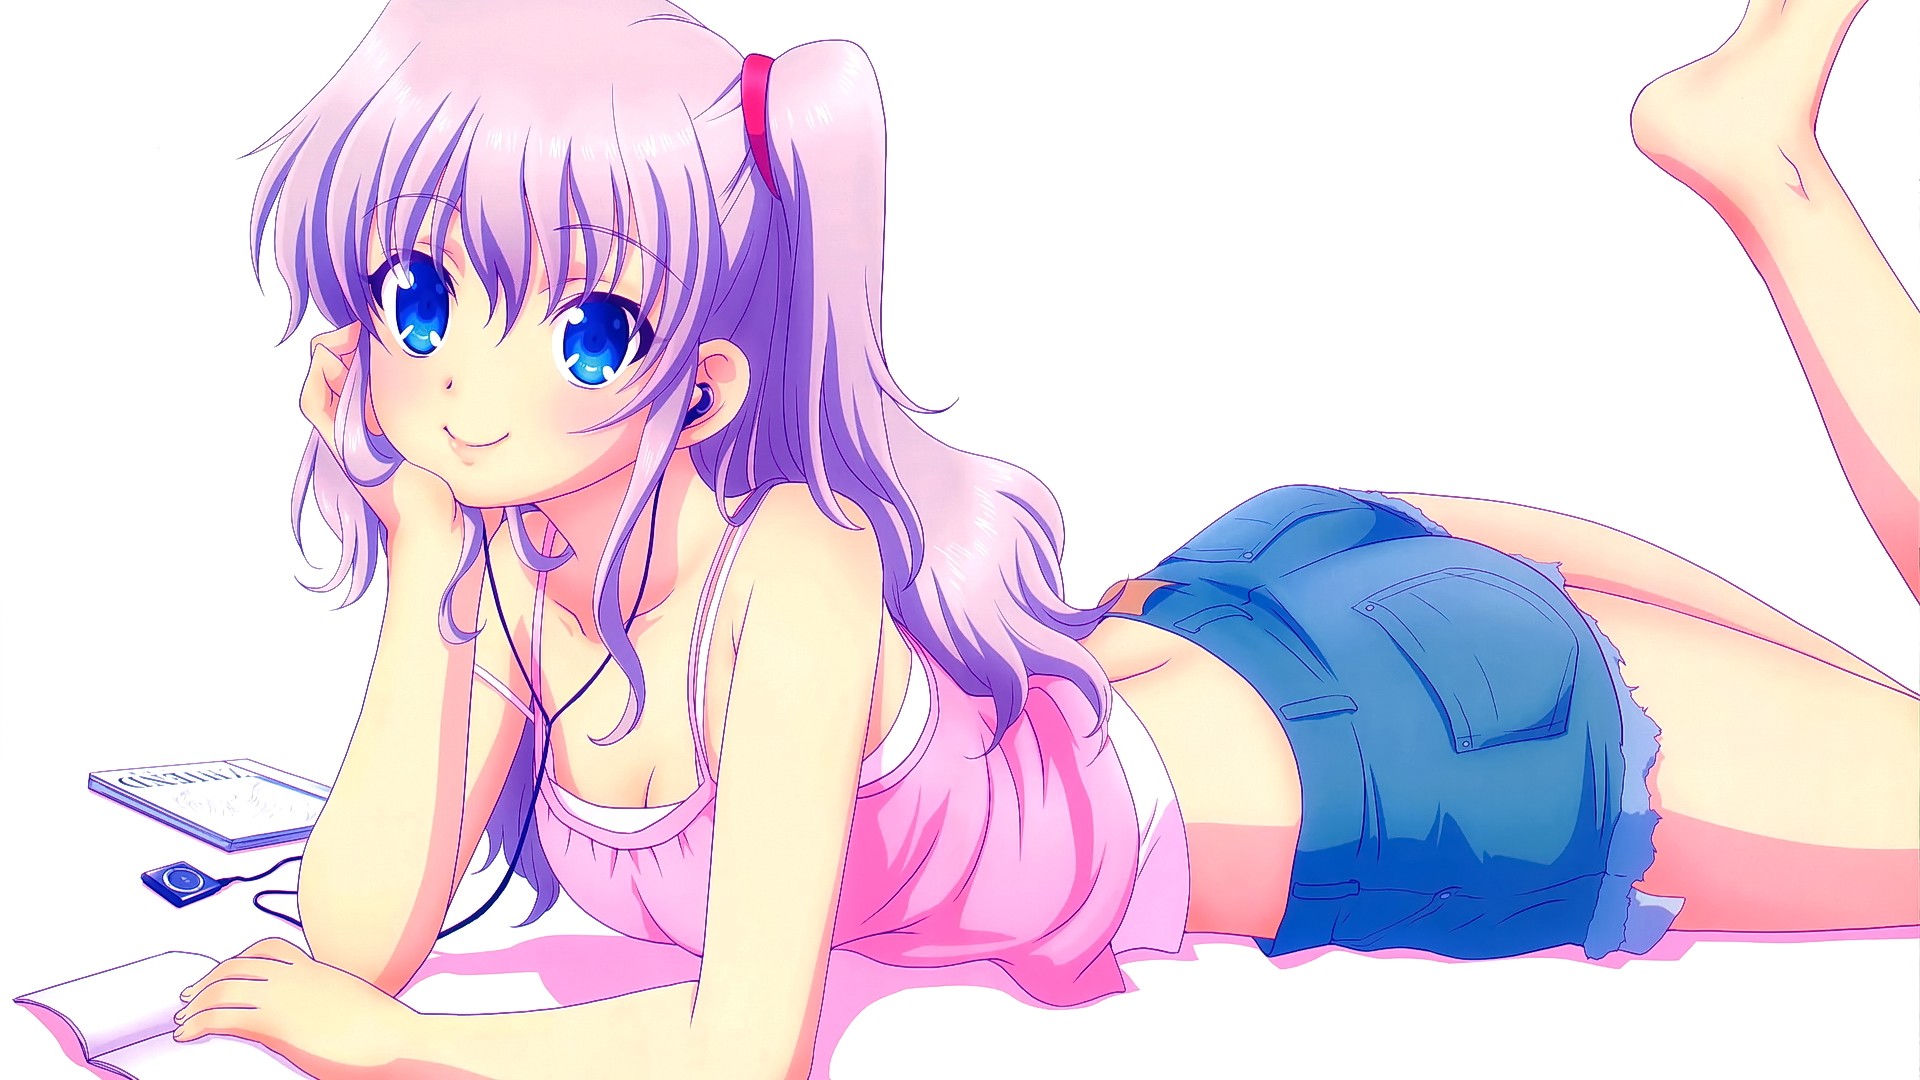 Anime 1920x1080 ass anime anime girls Tomori Nao headsets blue eyes long hair smiling iPod barefoot lying on front Charlotte (anime) looking at viewer white background